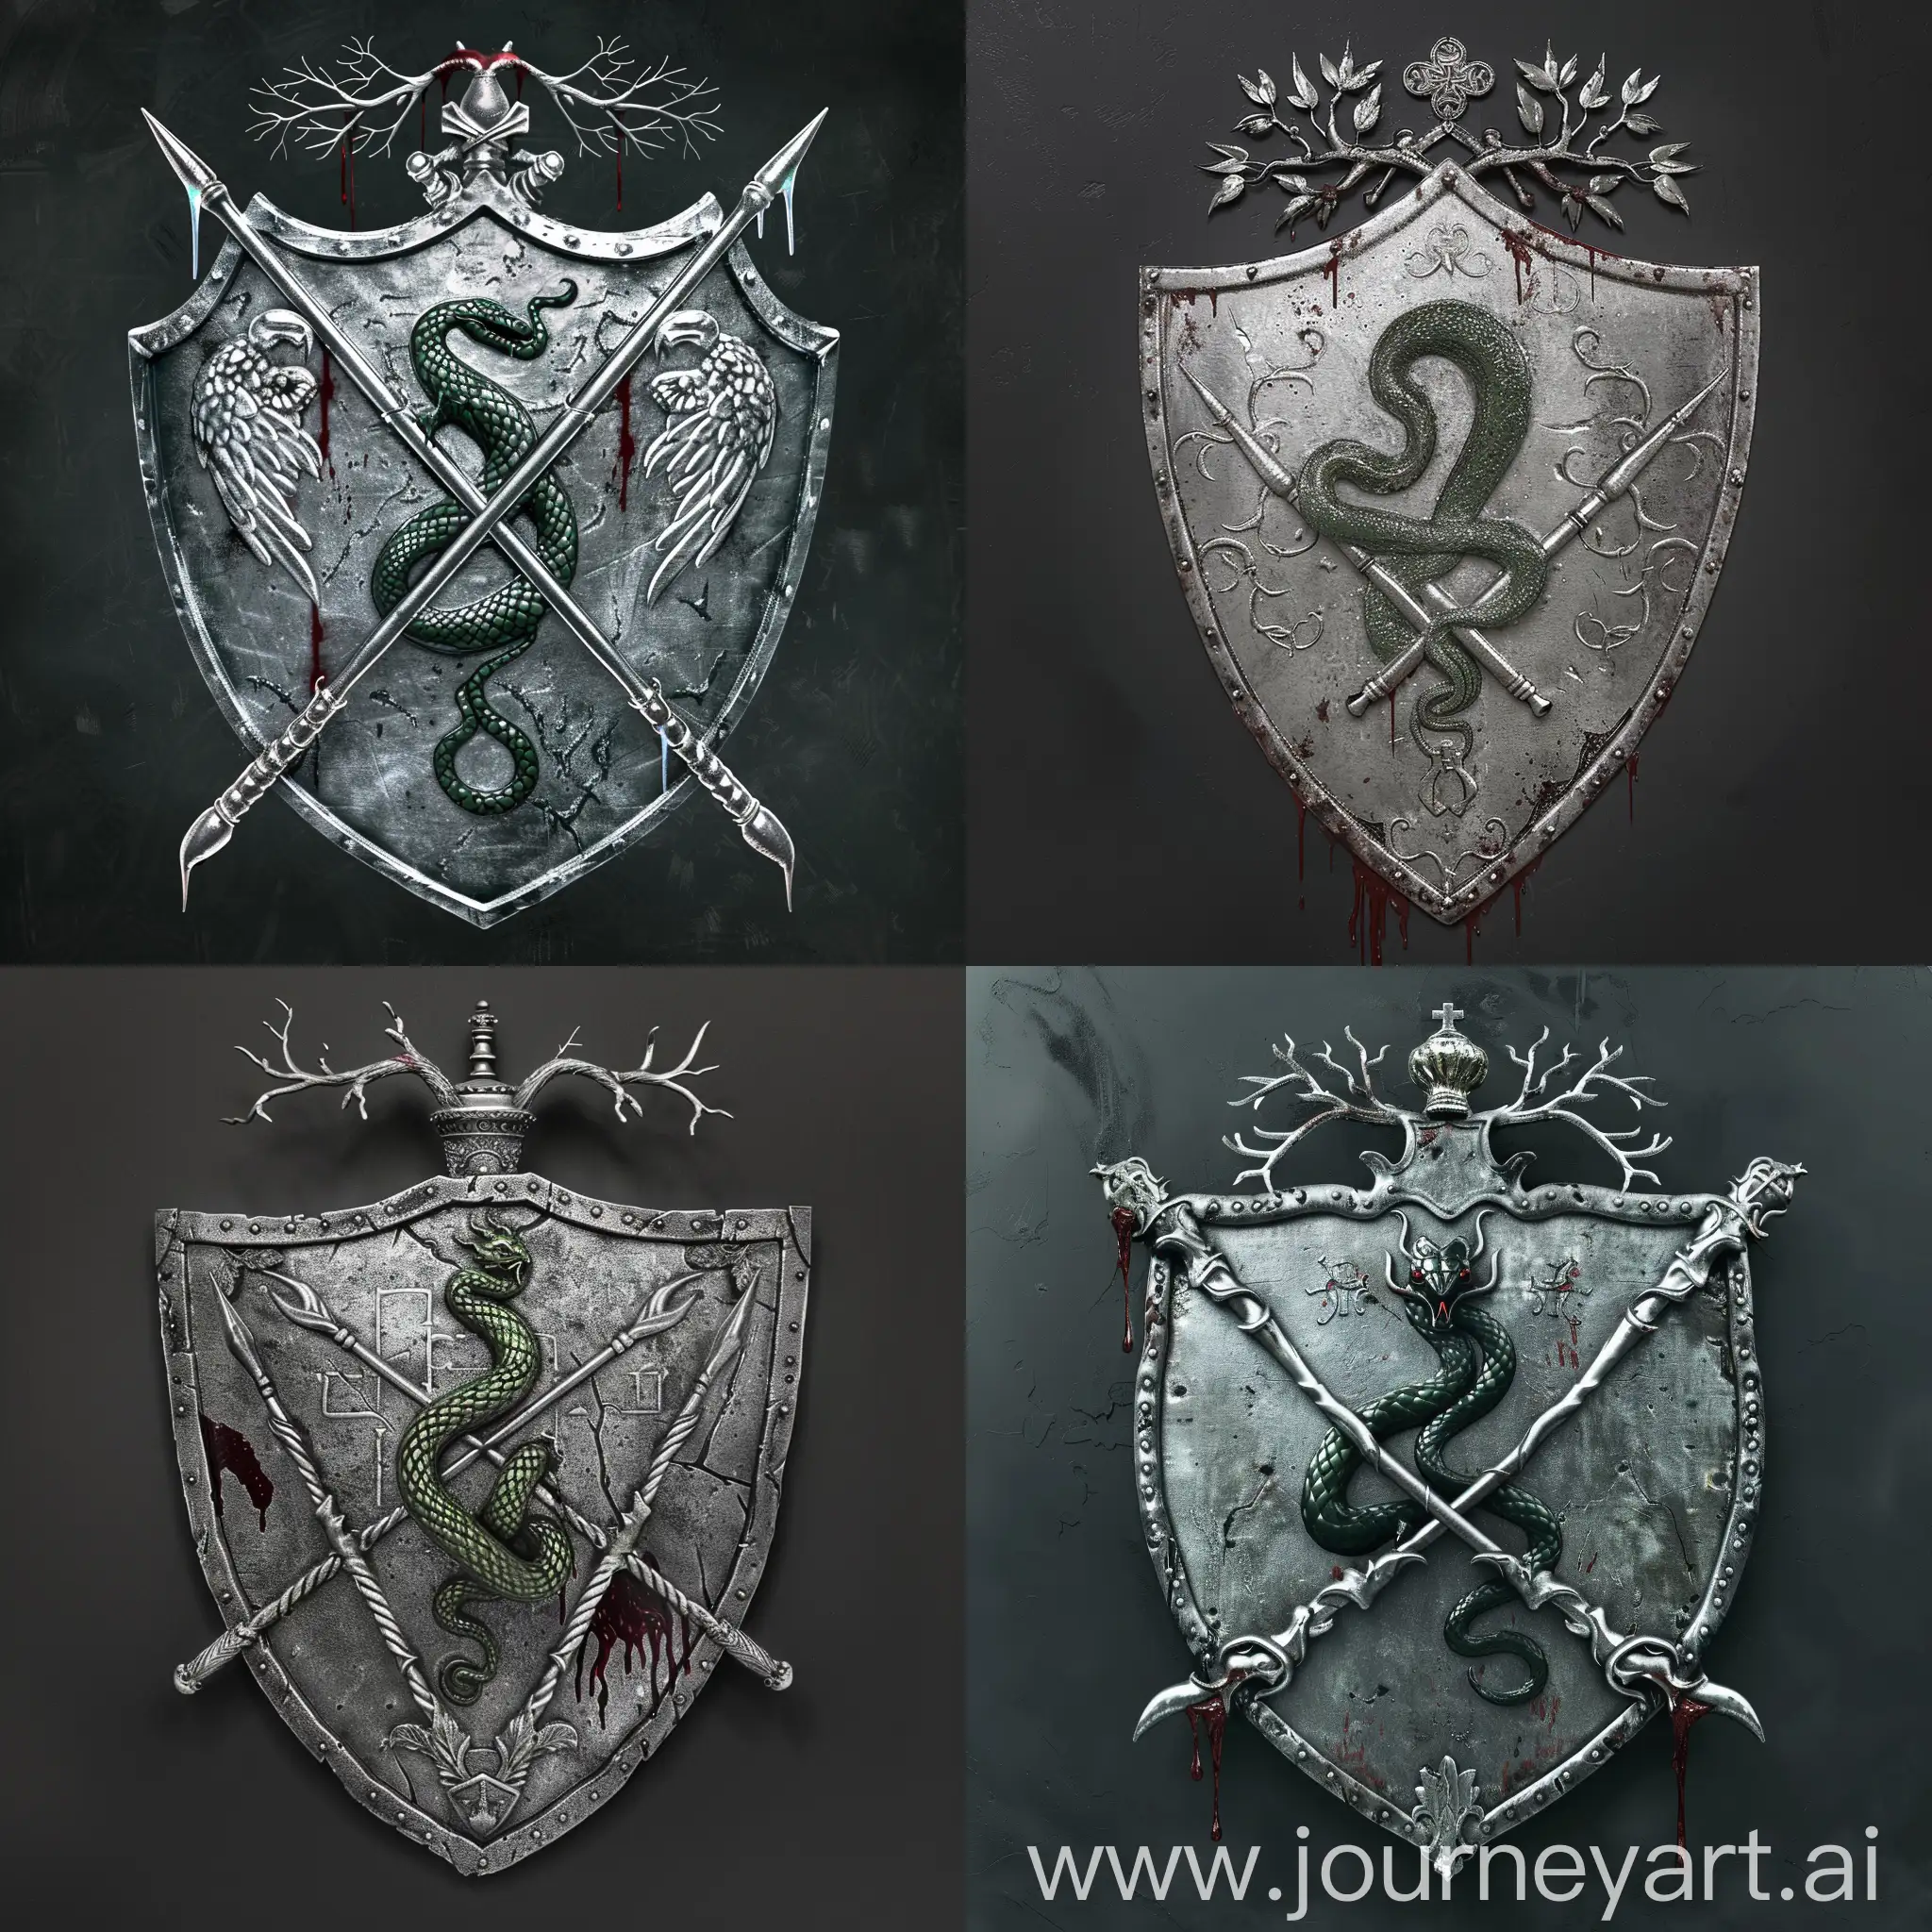 Silver-Coat-of-Arms-with-Crossed-Magic-Wands-and-Emerald-Serpent